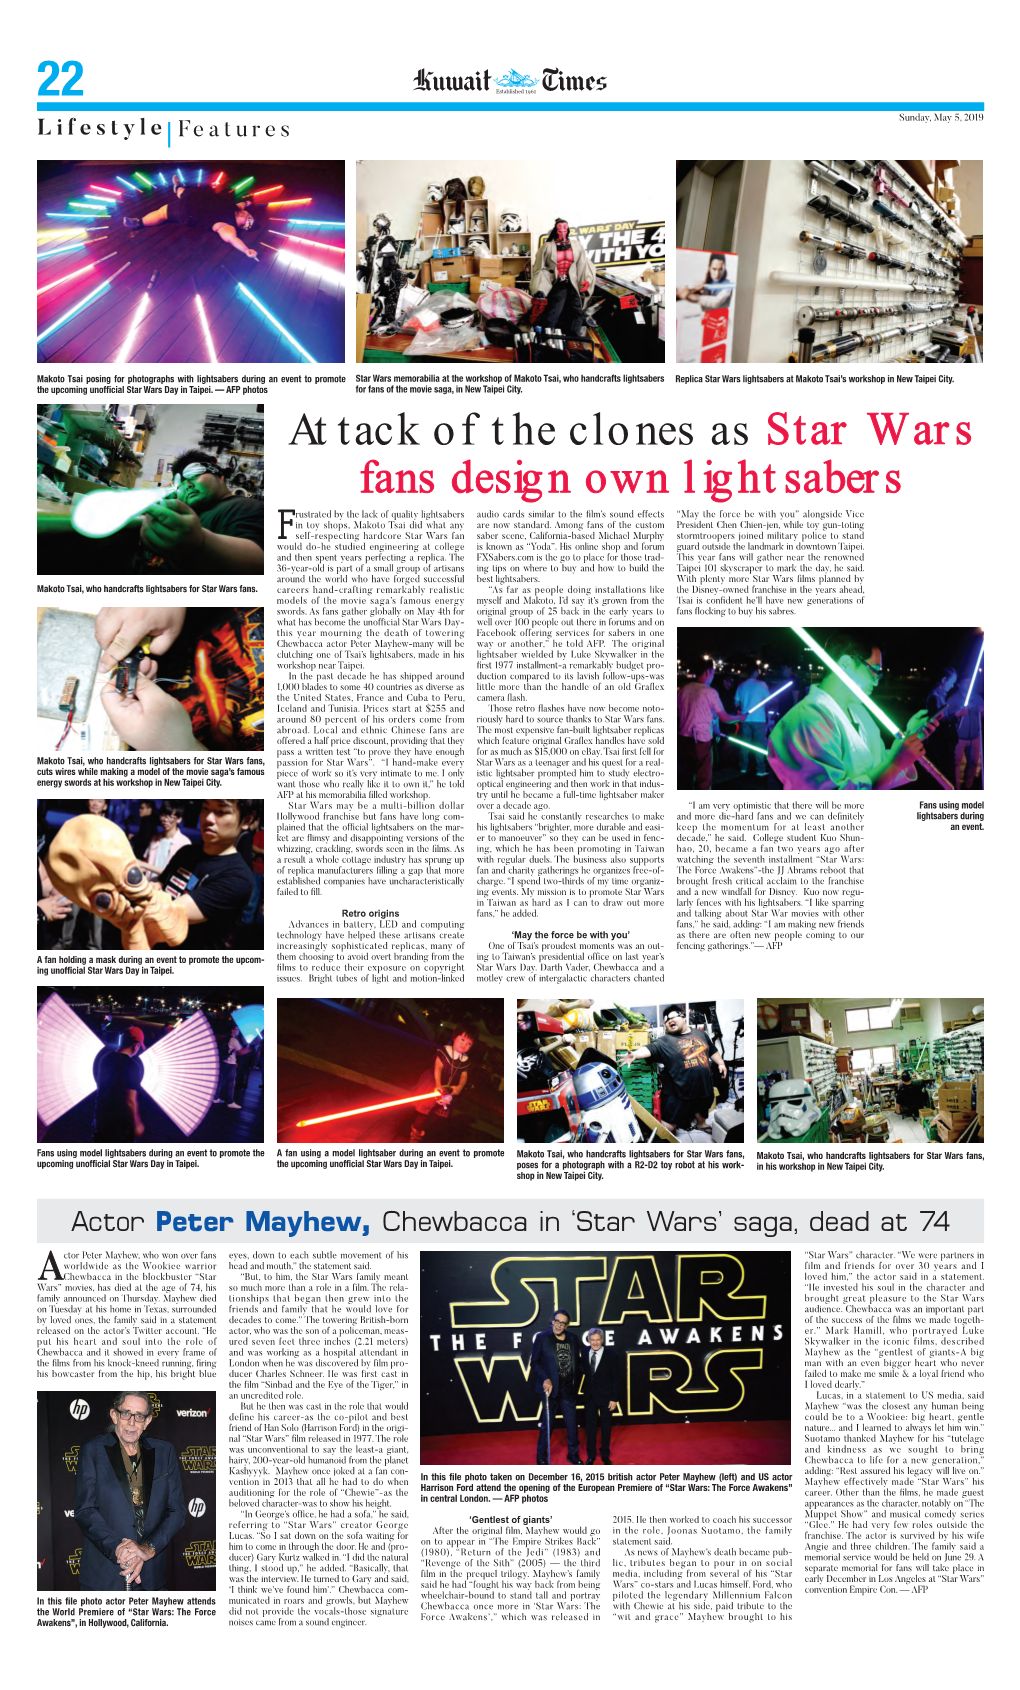 Attack of the Clones As Star Wars Fans Design Own Lightsabers